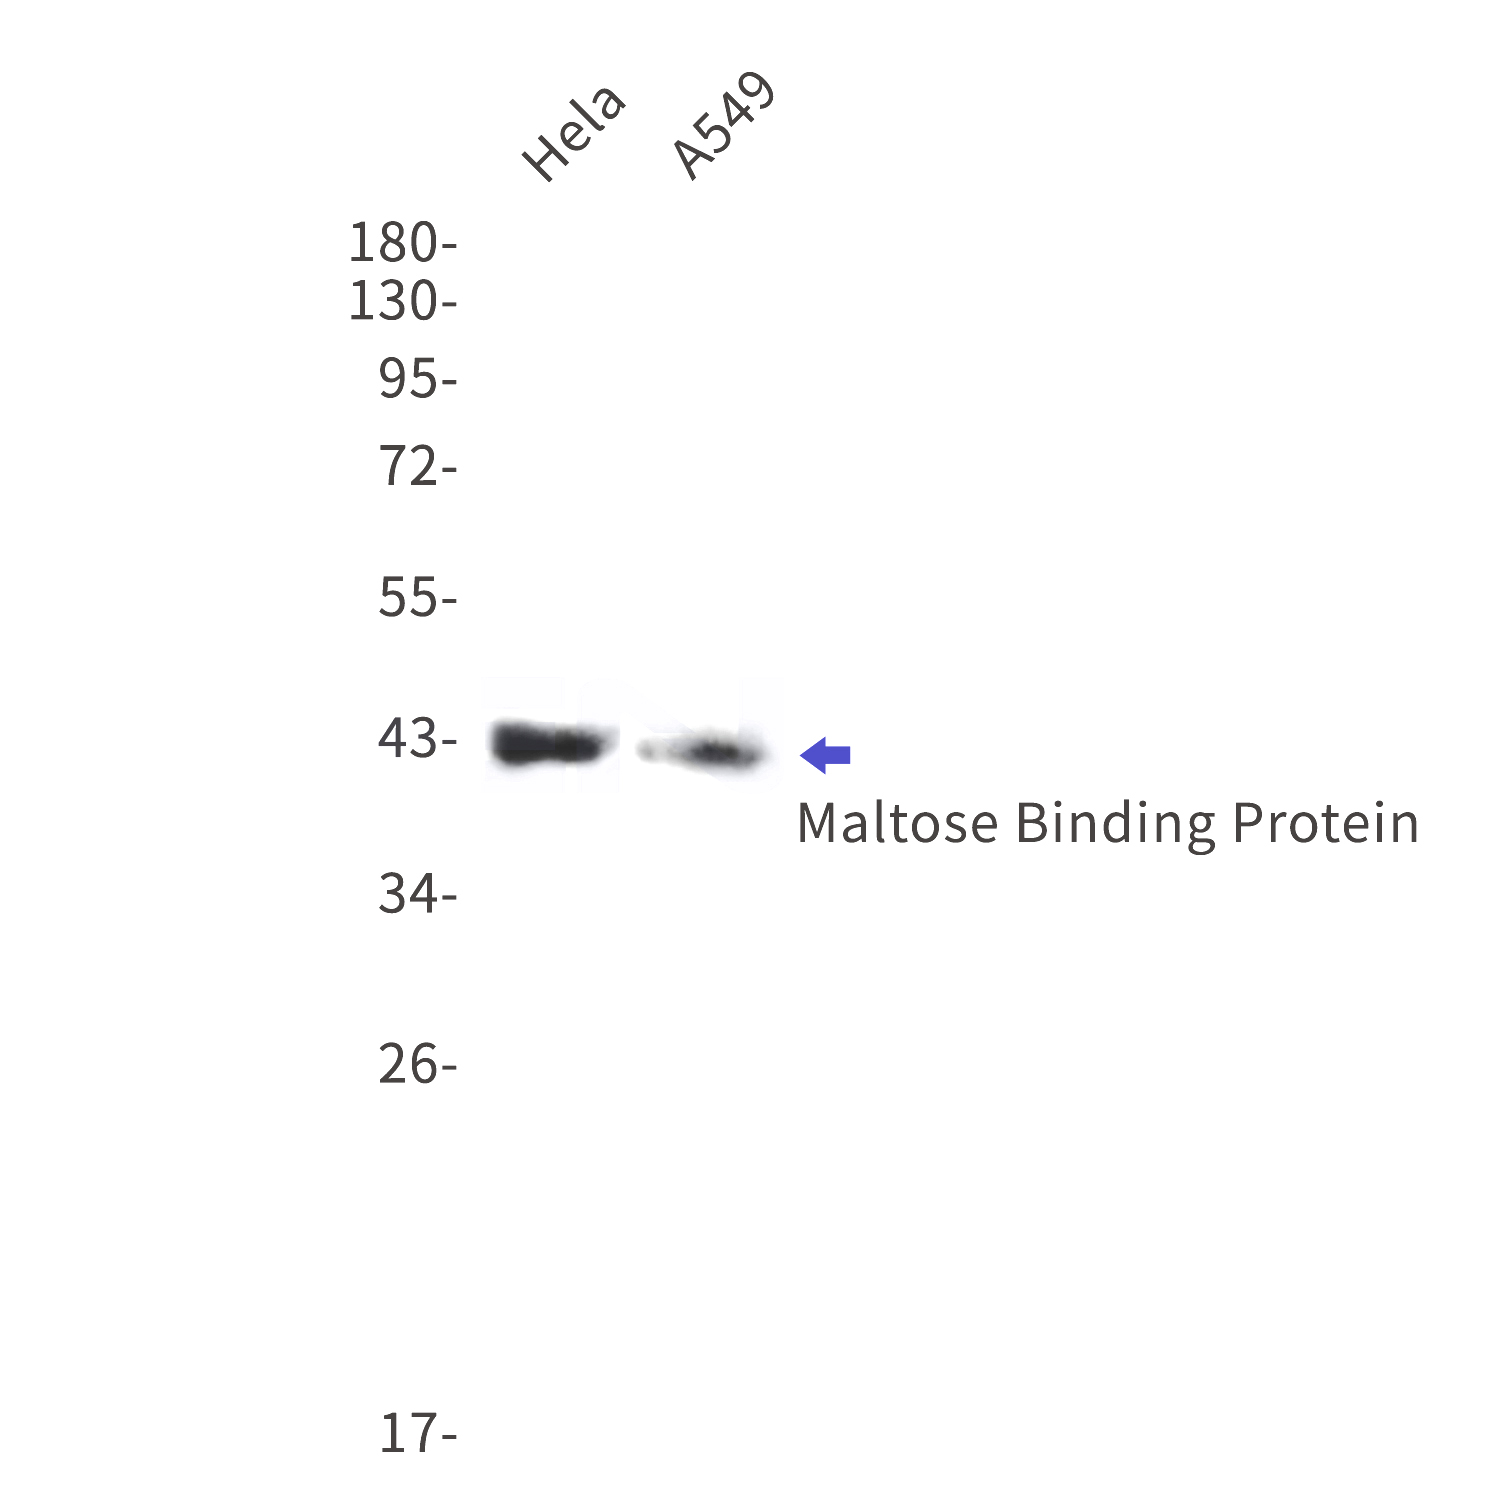 Western blot detection of Maltose Binding Protein in Hela,A549 cell lysates using Maltose Binding Protein Rabbit mAb(1:1000 diluted).Observed band size:43kDa.